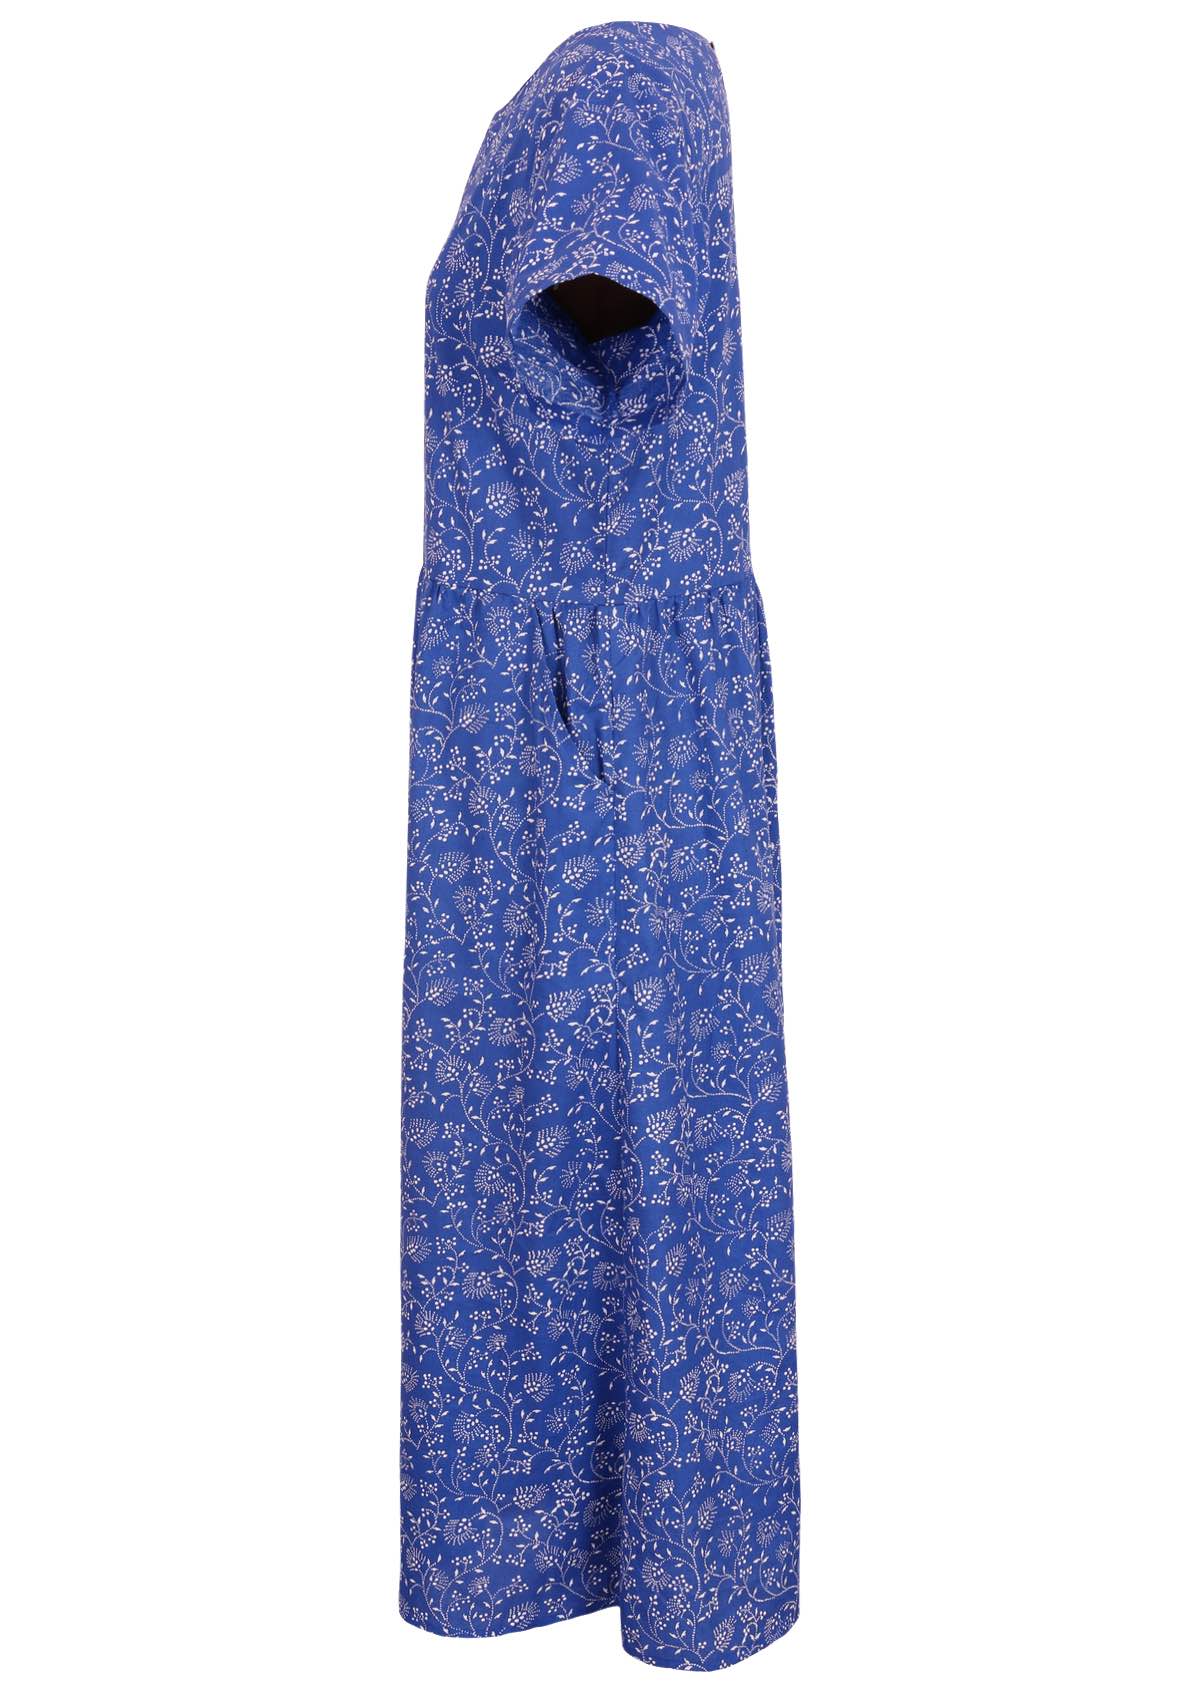 Blue floral dress made of 100% cotton with pockets and a round neckline. 